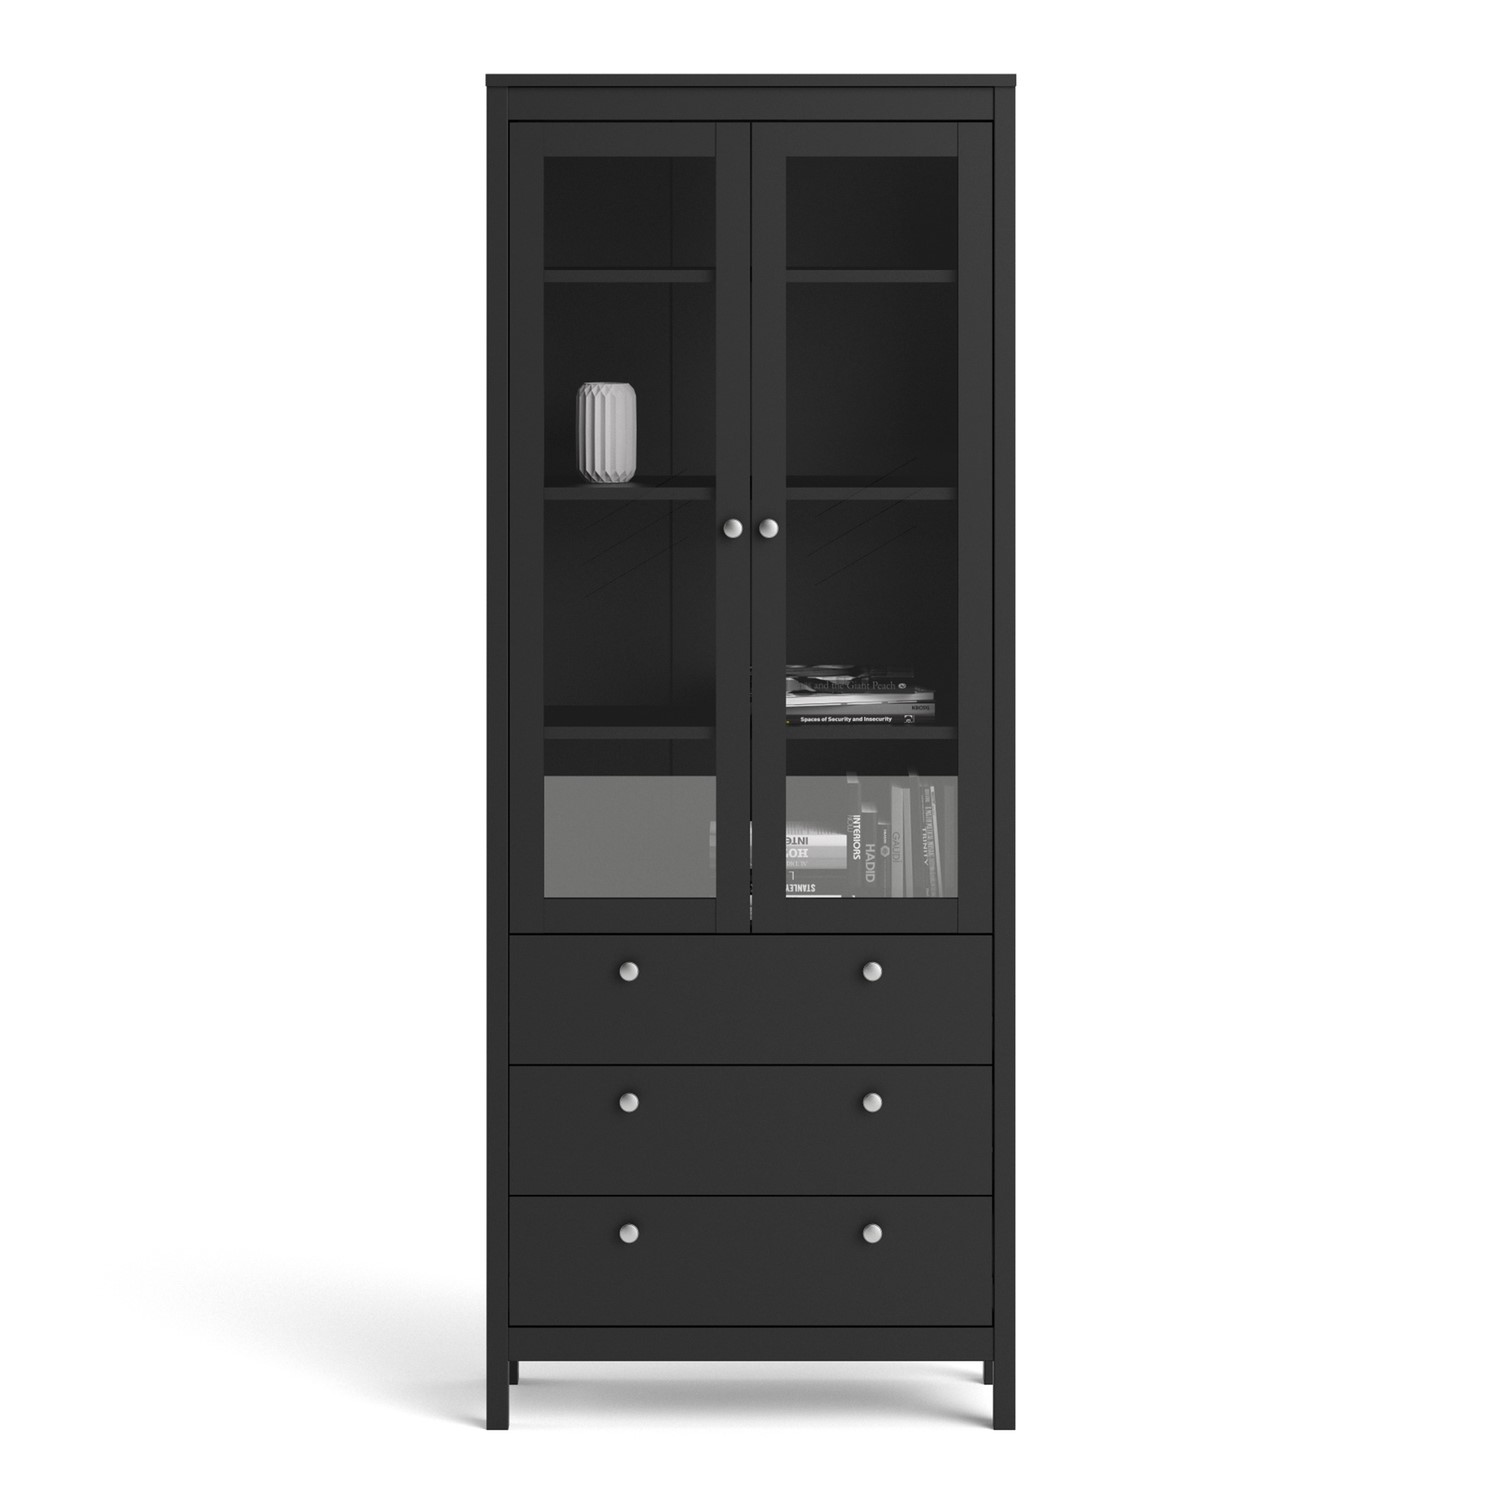 Photo of Tall black display cabinet with glass doors - madrid